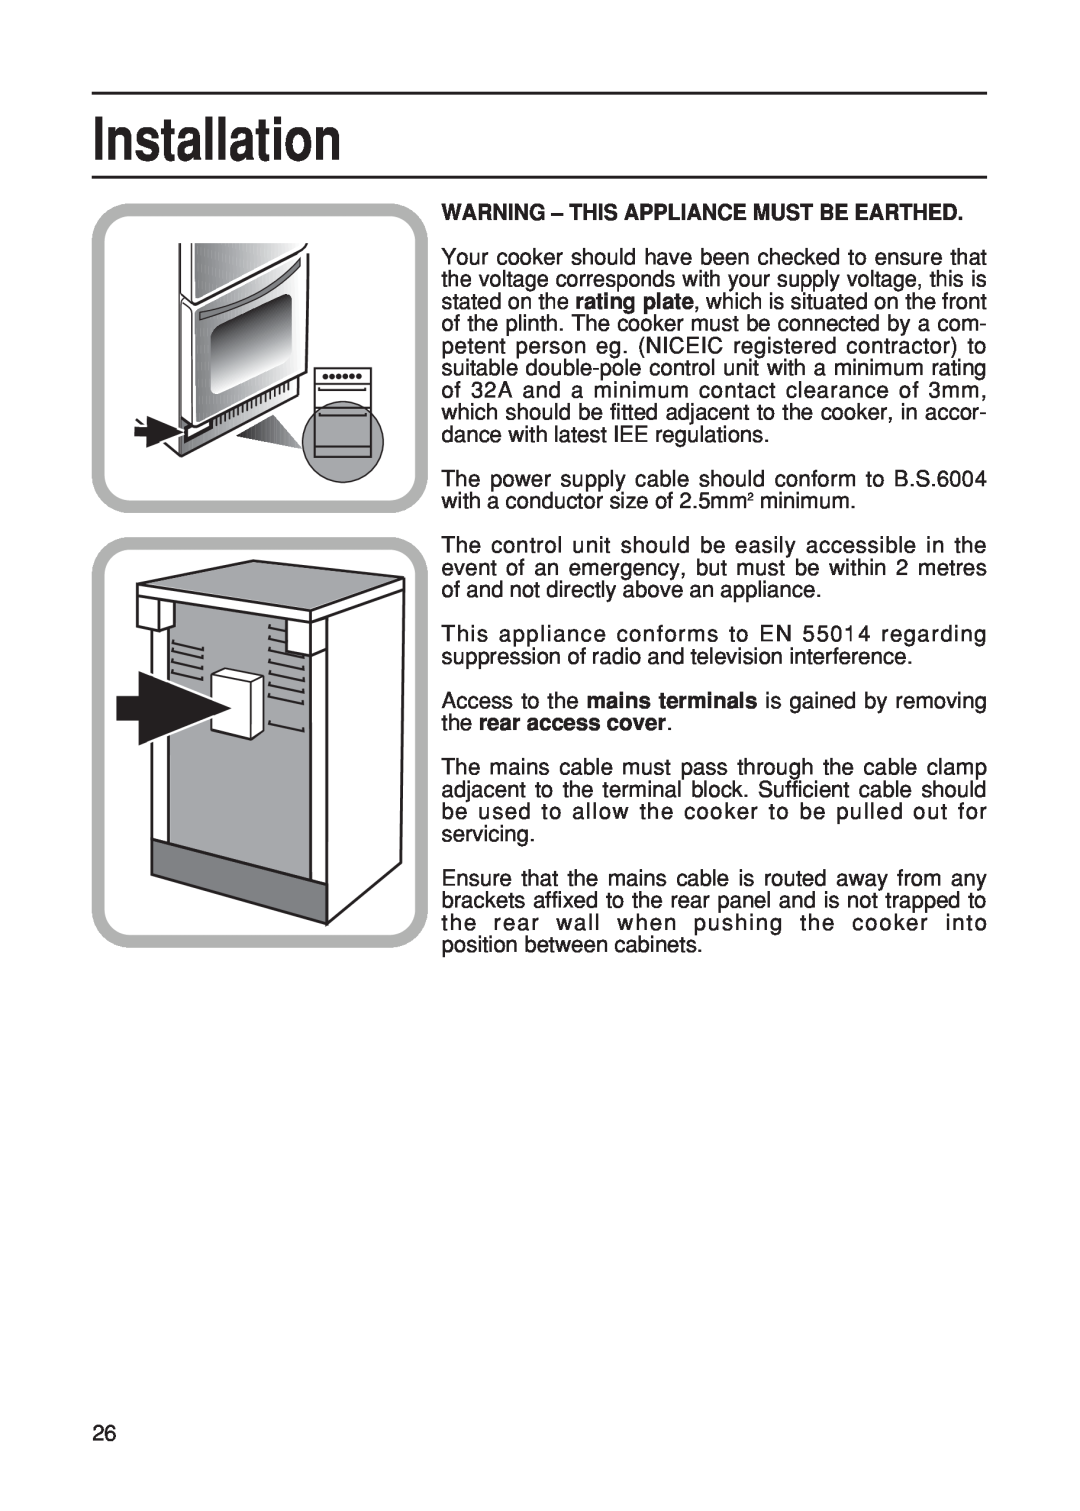 Hotpoint EG21 manual Installation, Warning - This Appliance Must Be Earthed 